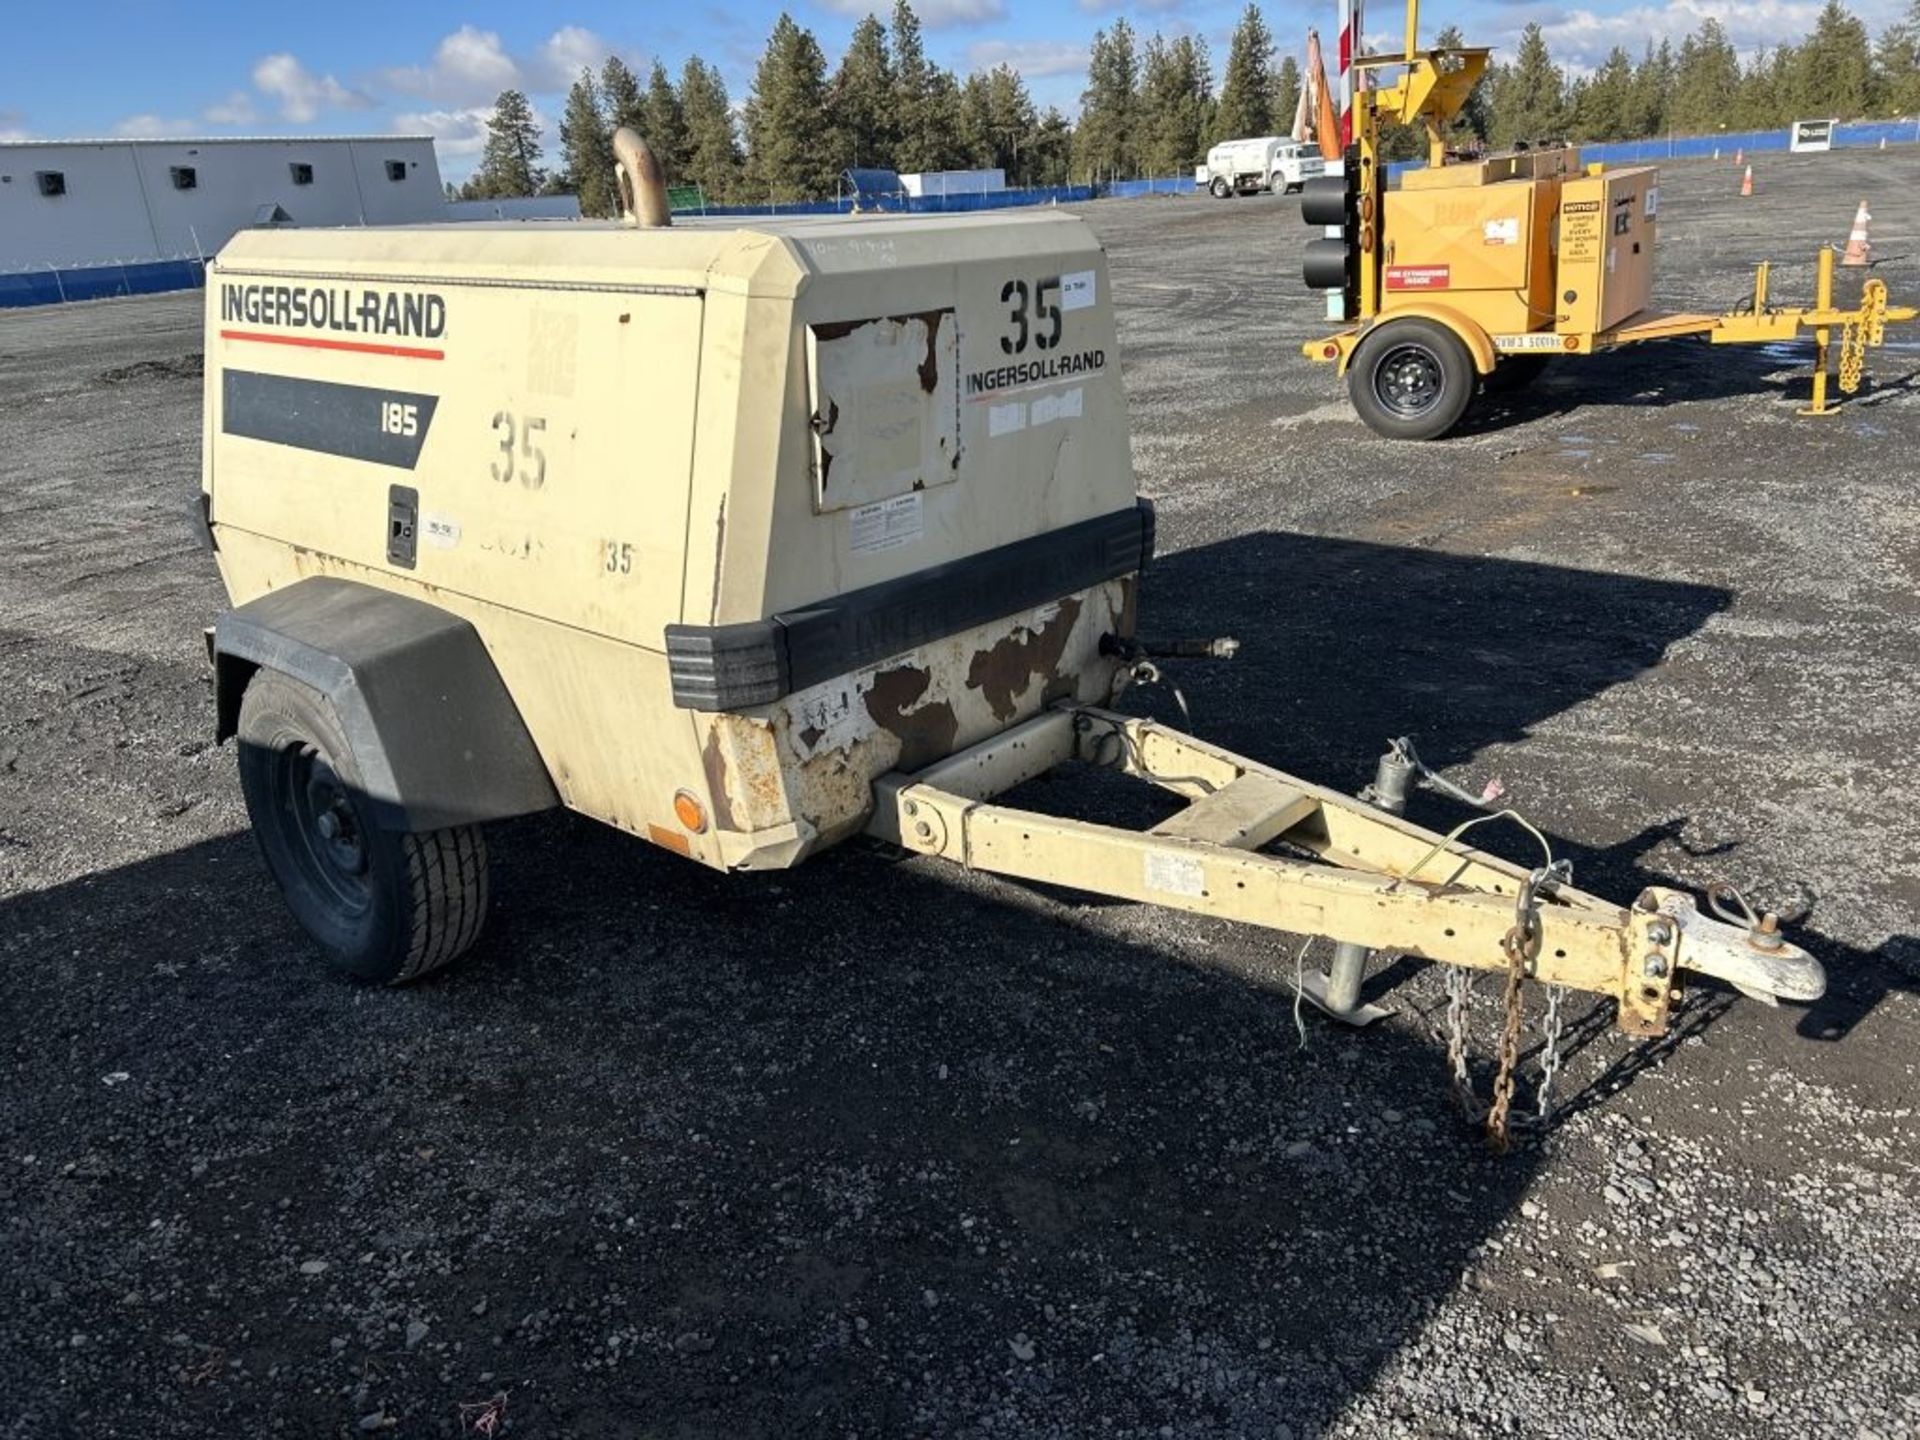 1999 Ingersoll-Rand 185 Towable Air Compressor - Image 7 of 29